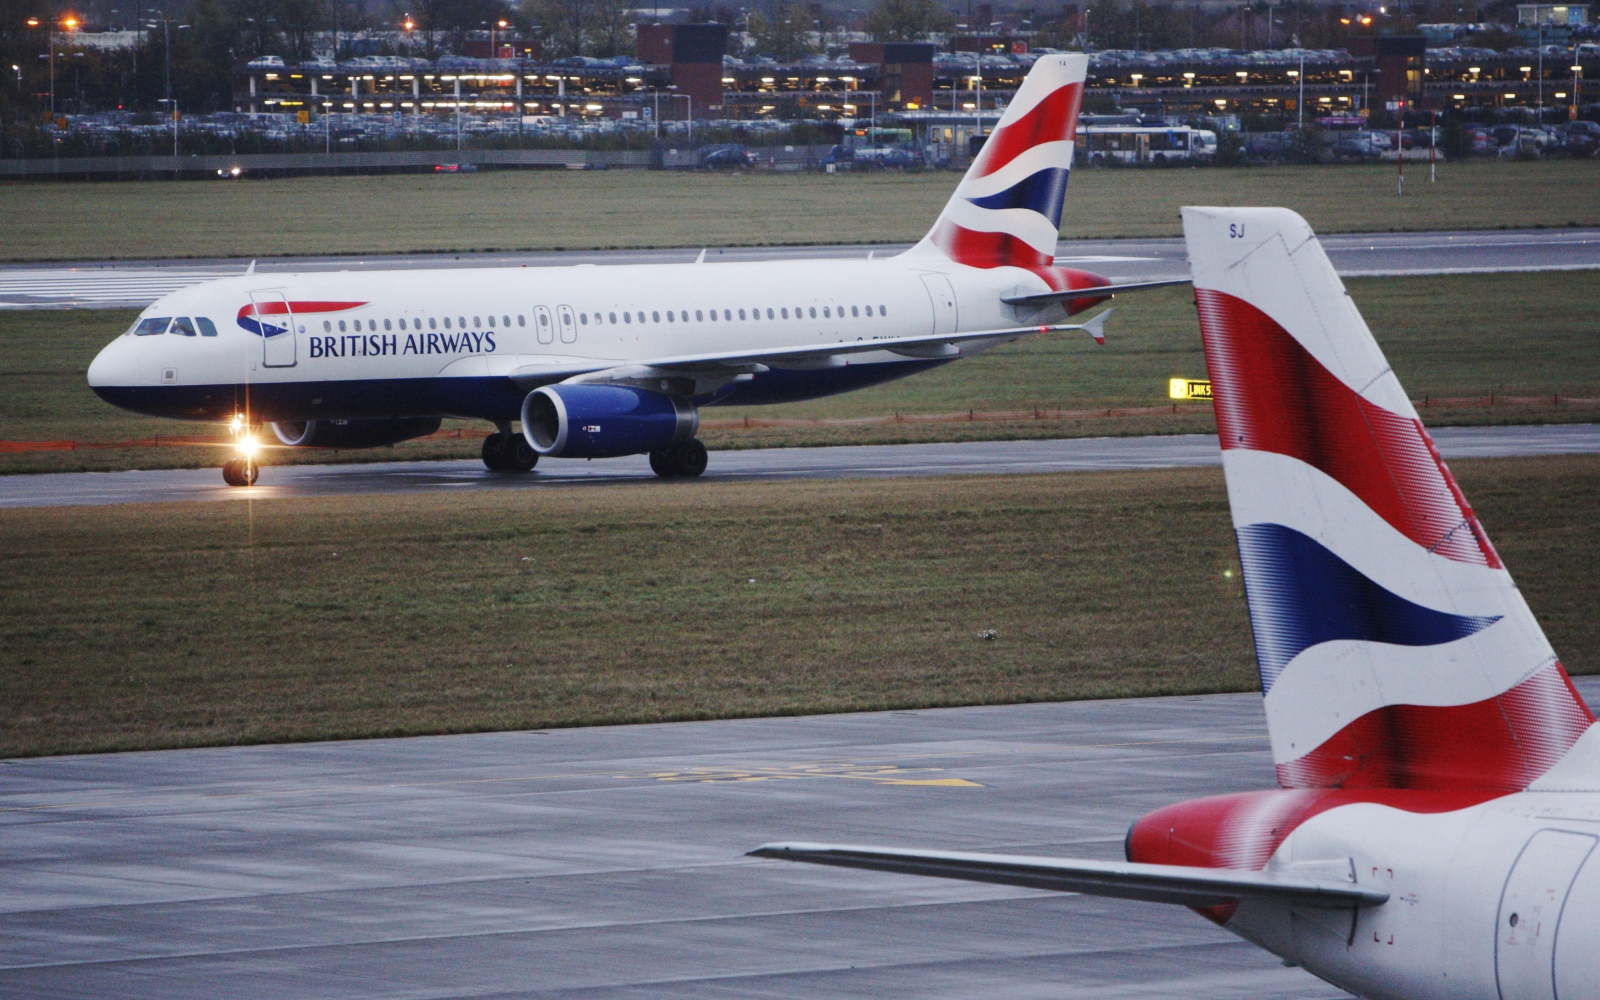 Striking BA cabin crew claim low pay means they sleep in cars